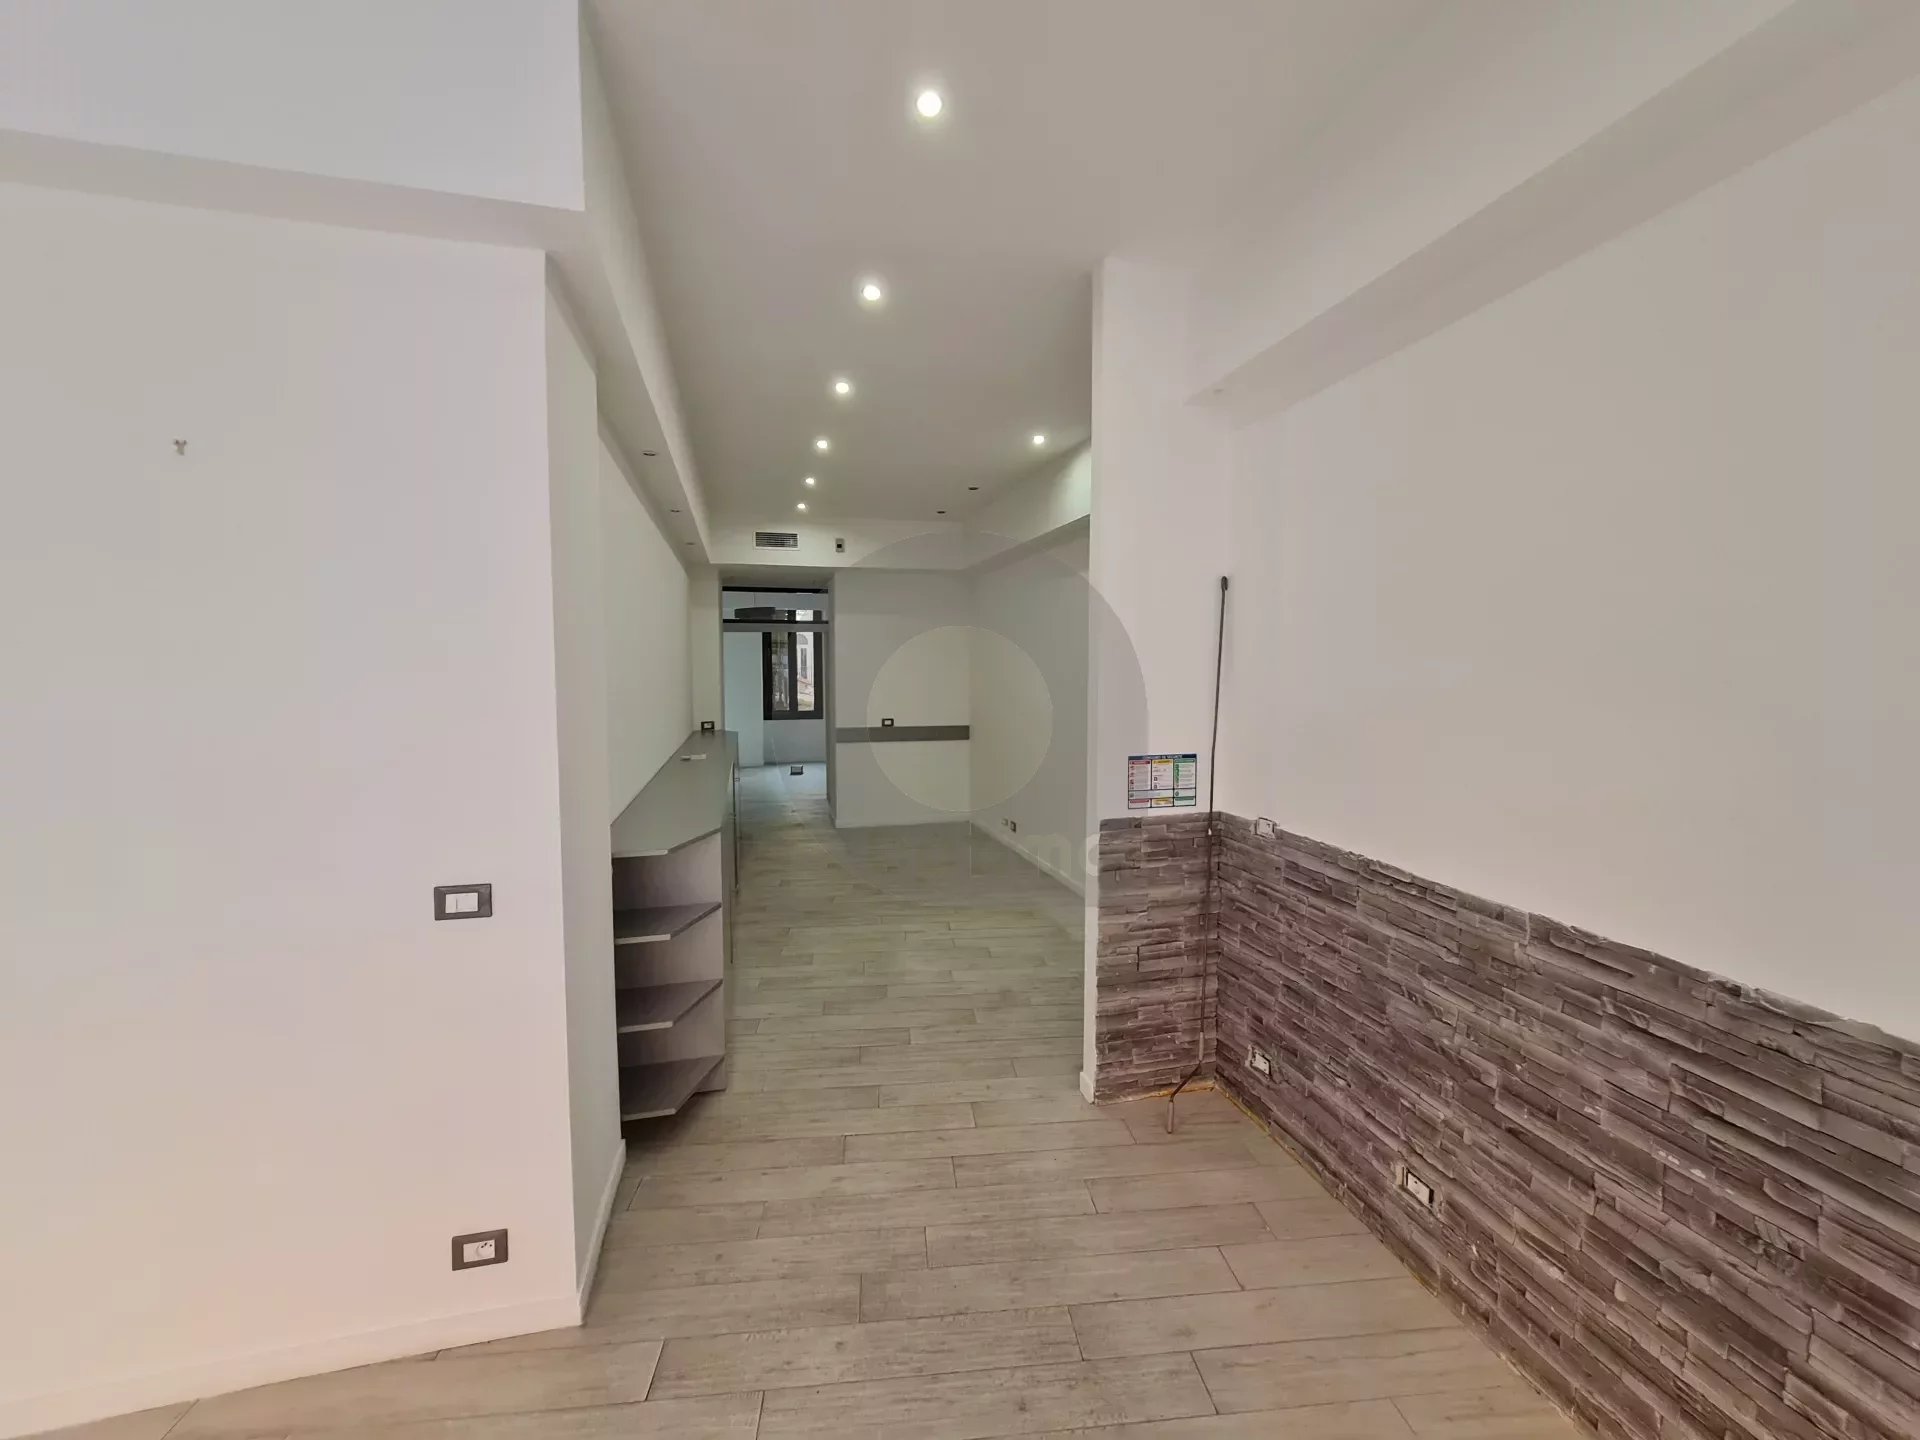 RIGHT TO THE LEASE COMMERCIAL PREMISES FOR RENT MENTON CENTRE VILLE